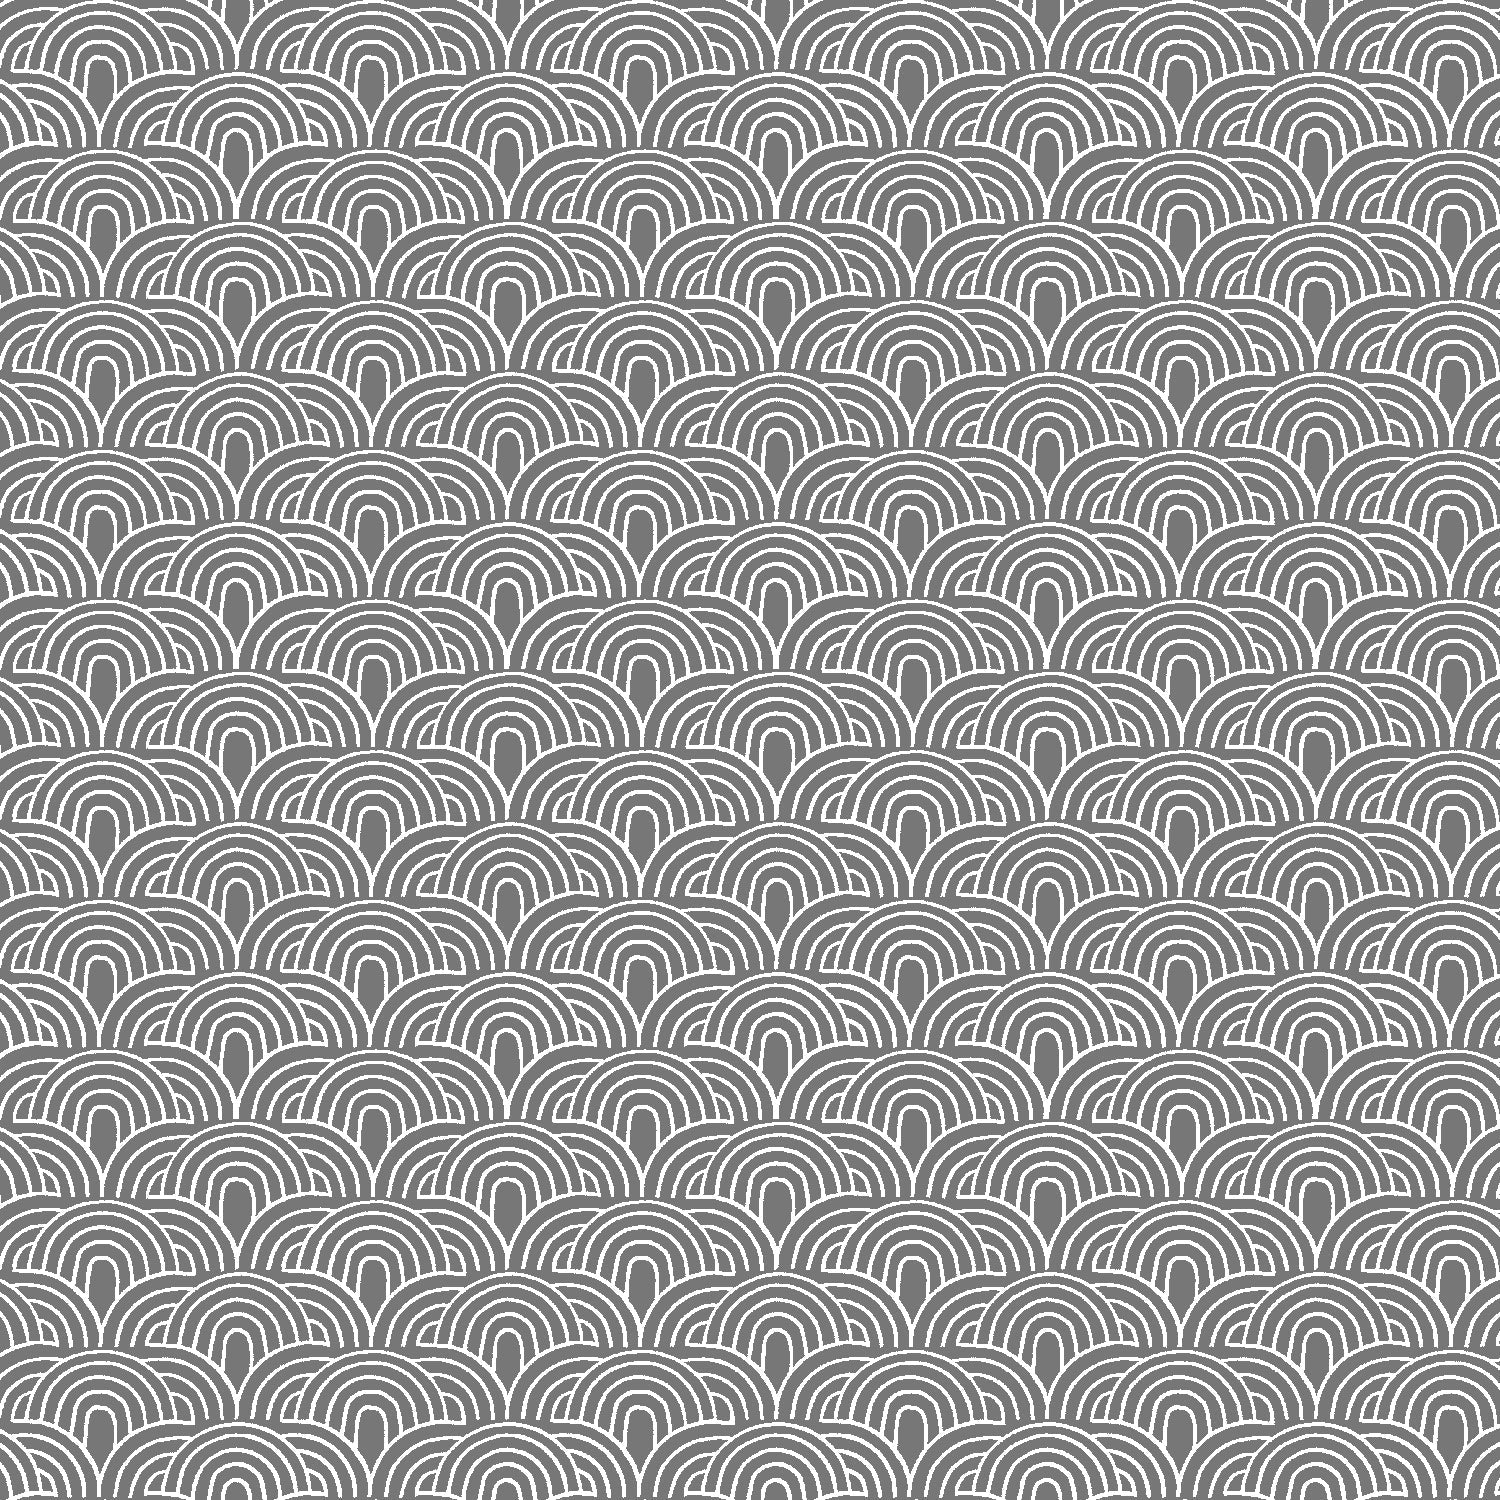 Cotton + Steel-Double Arches Gray Cloud-fabric-gather here online